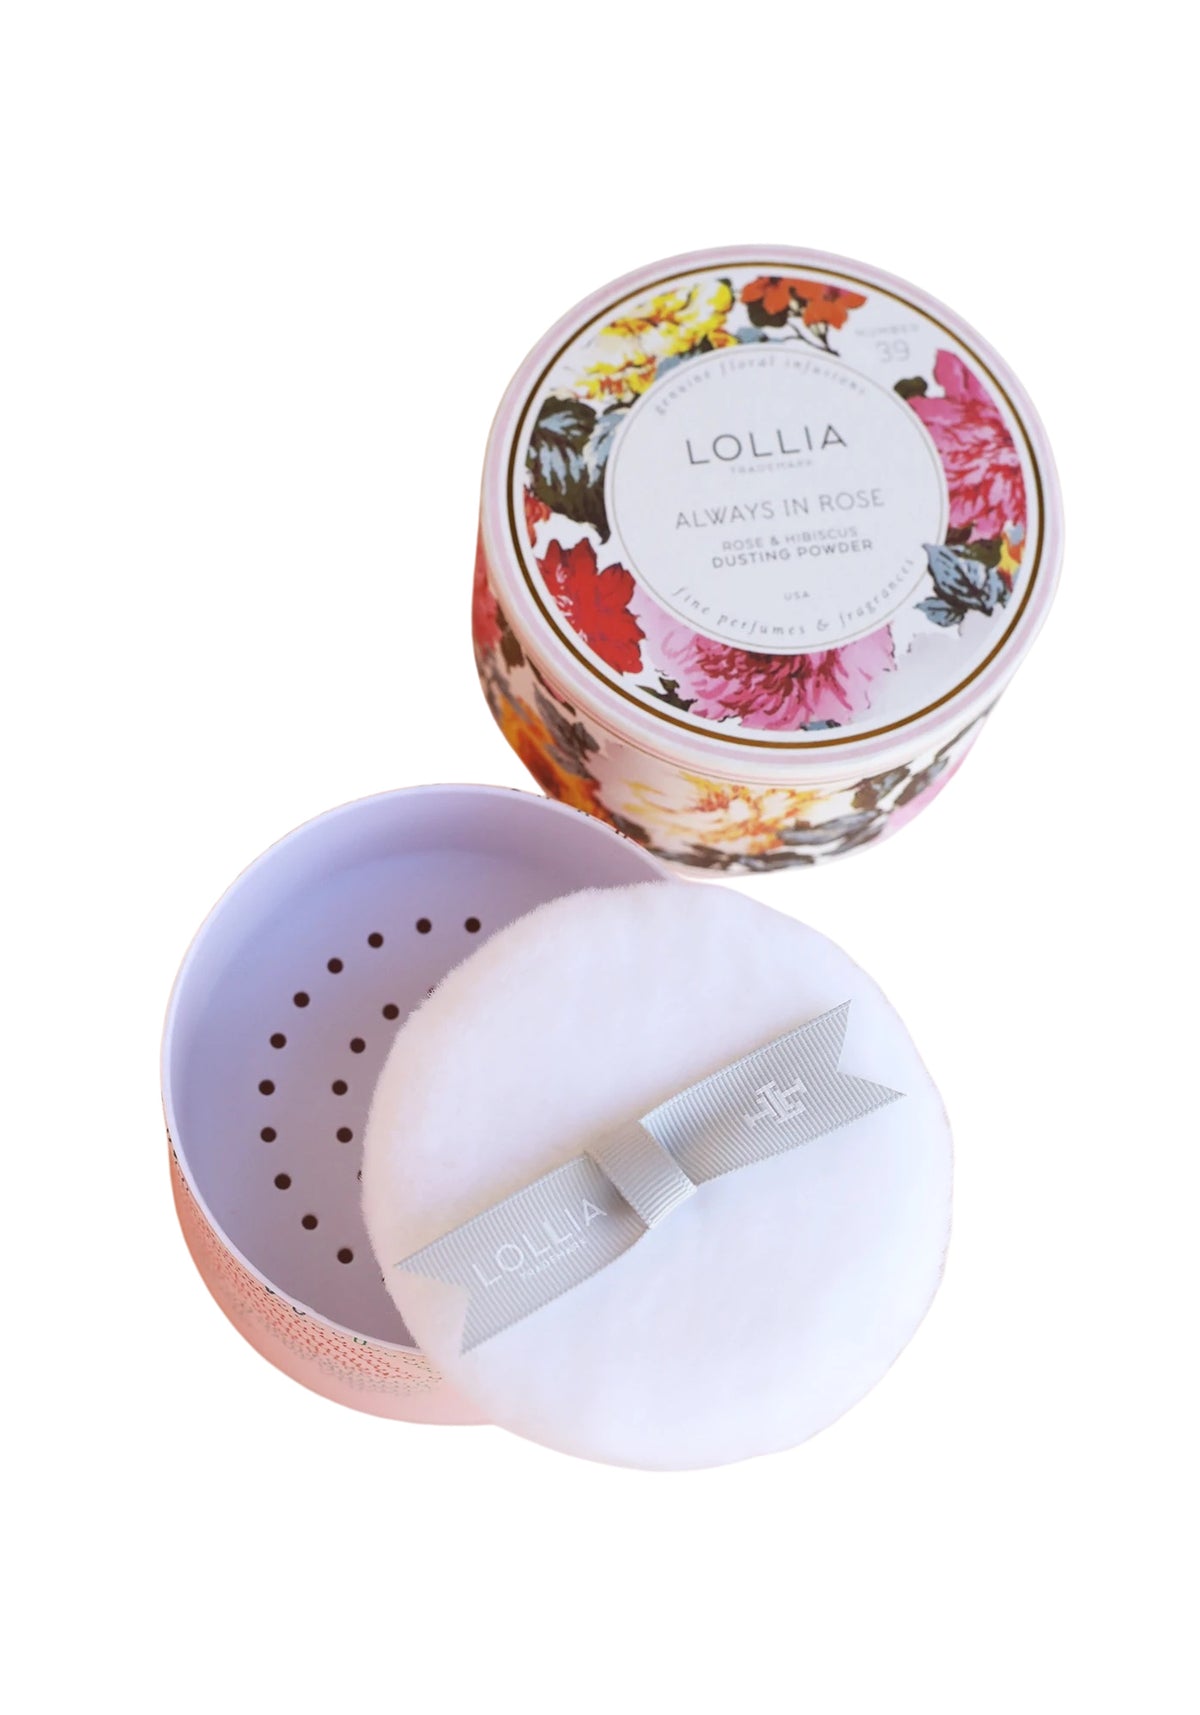 A container of Margot Elena Lollia Always in Rose dusting powder with its lid off, displaying a floral pattern on the label and a powder puff on the side, isolated on a white